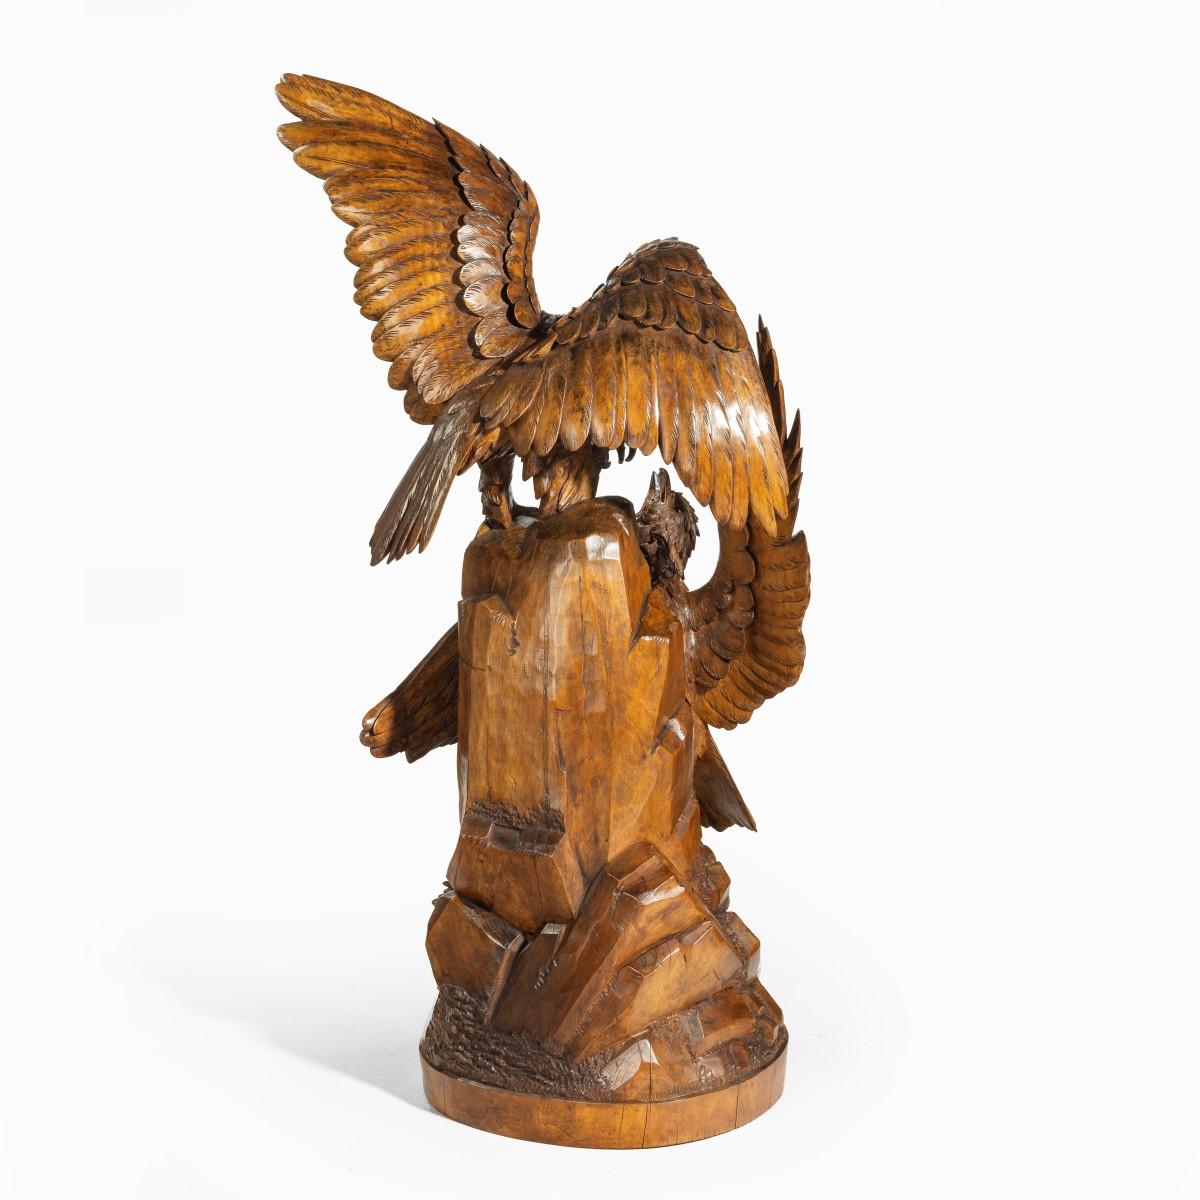 A ‘Black Forest’ carving of two quarrelling golden eagles, the linden wood carving with one bird attempting to displace the other bird from the top of a rocky outcrop, applied with a brass plaque ‘Sculptures Binder, Lucerne, Zermatt, St. Moritz.